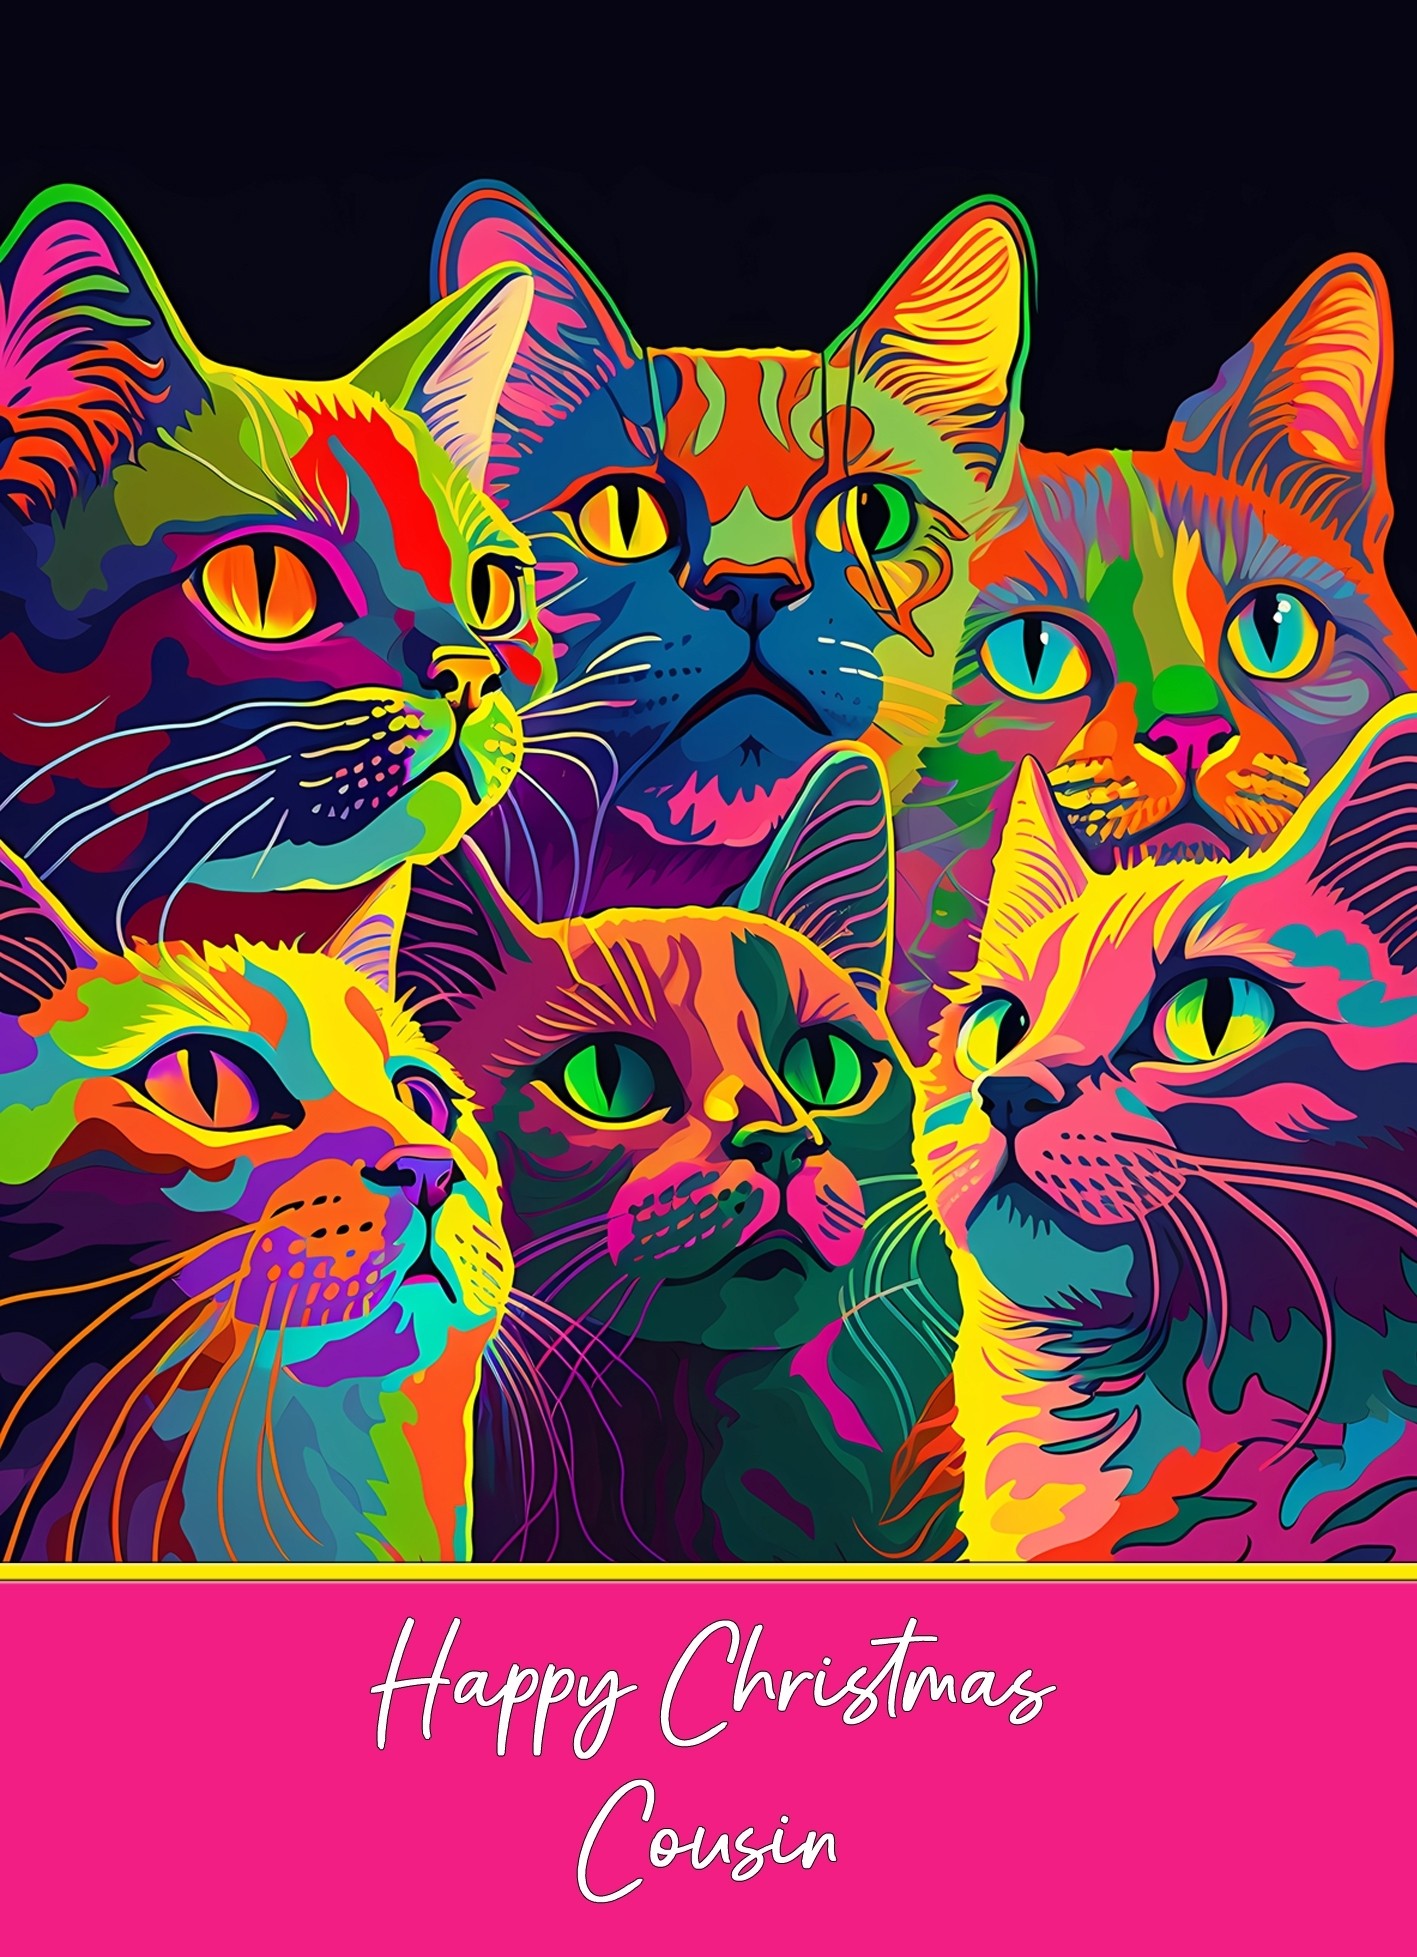 Christmas Card For Cousin (Colourful Cat Art)